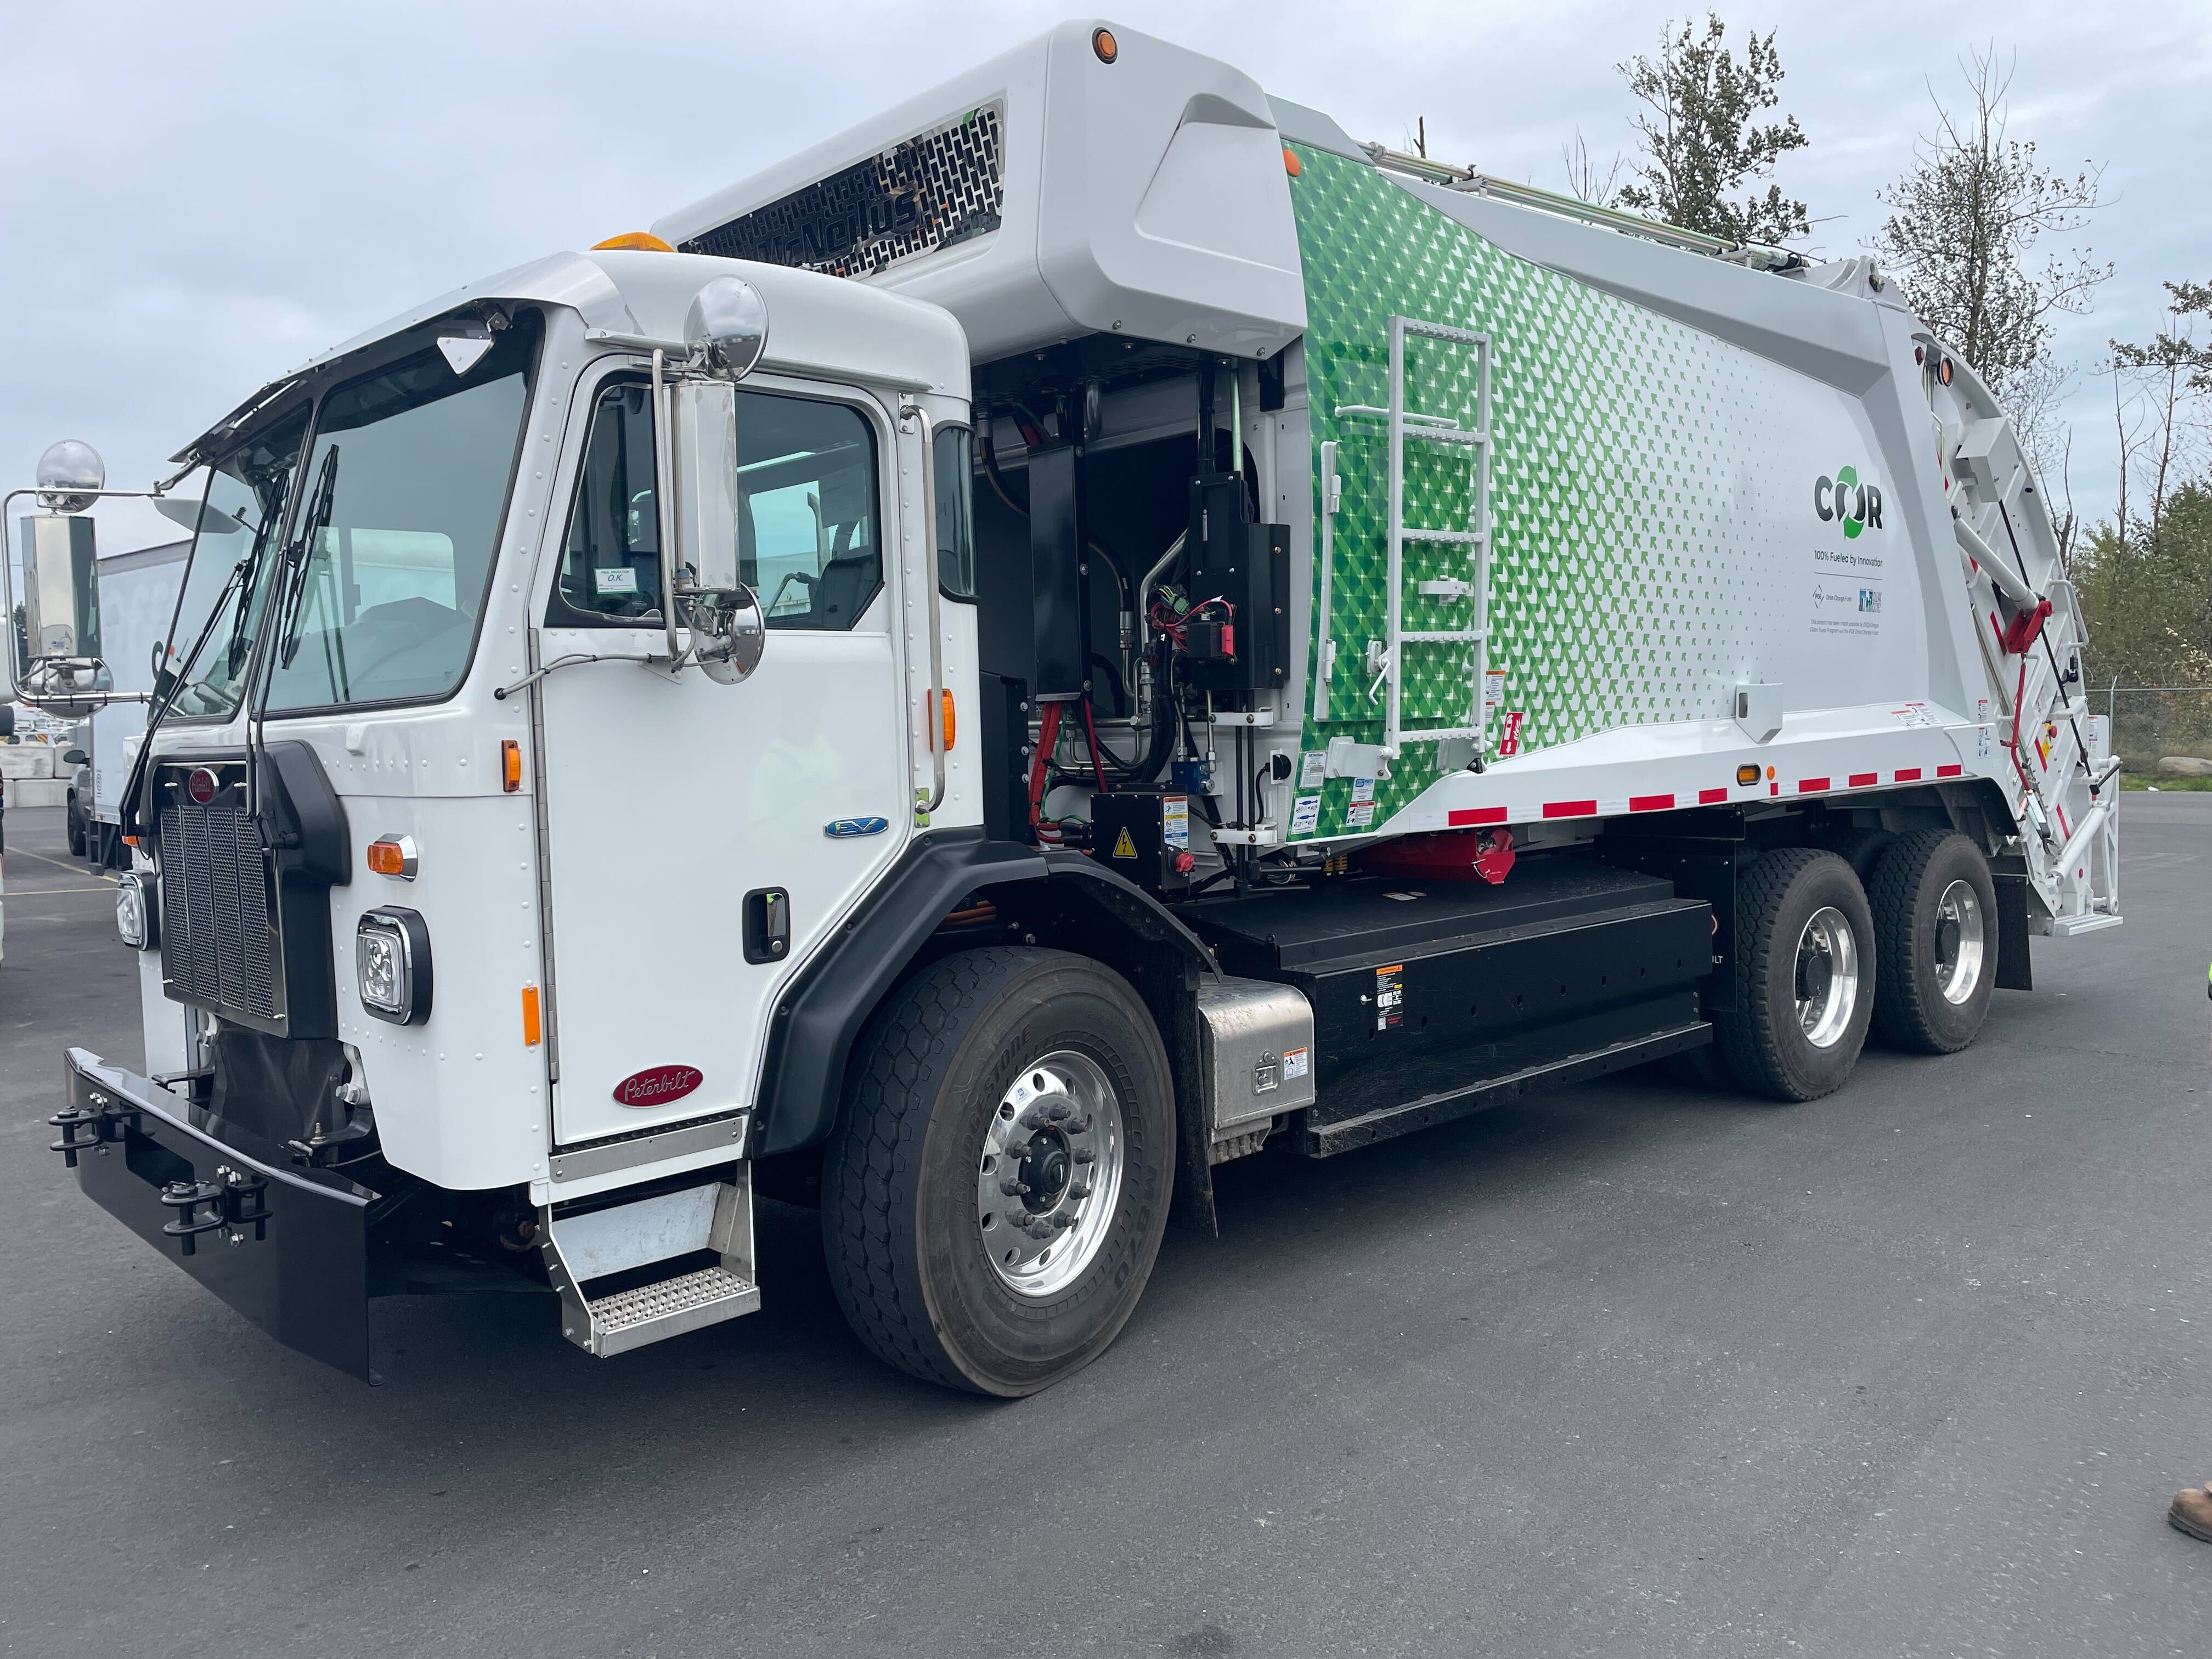 Portland's first electric garbage truck will hit eastside streets soon - OPB